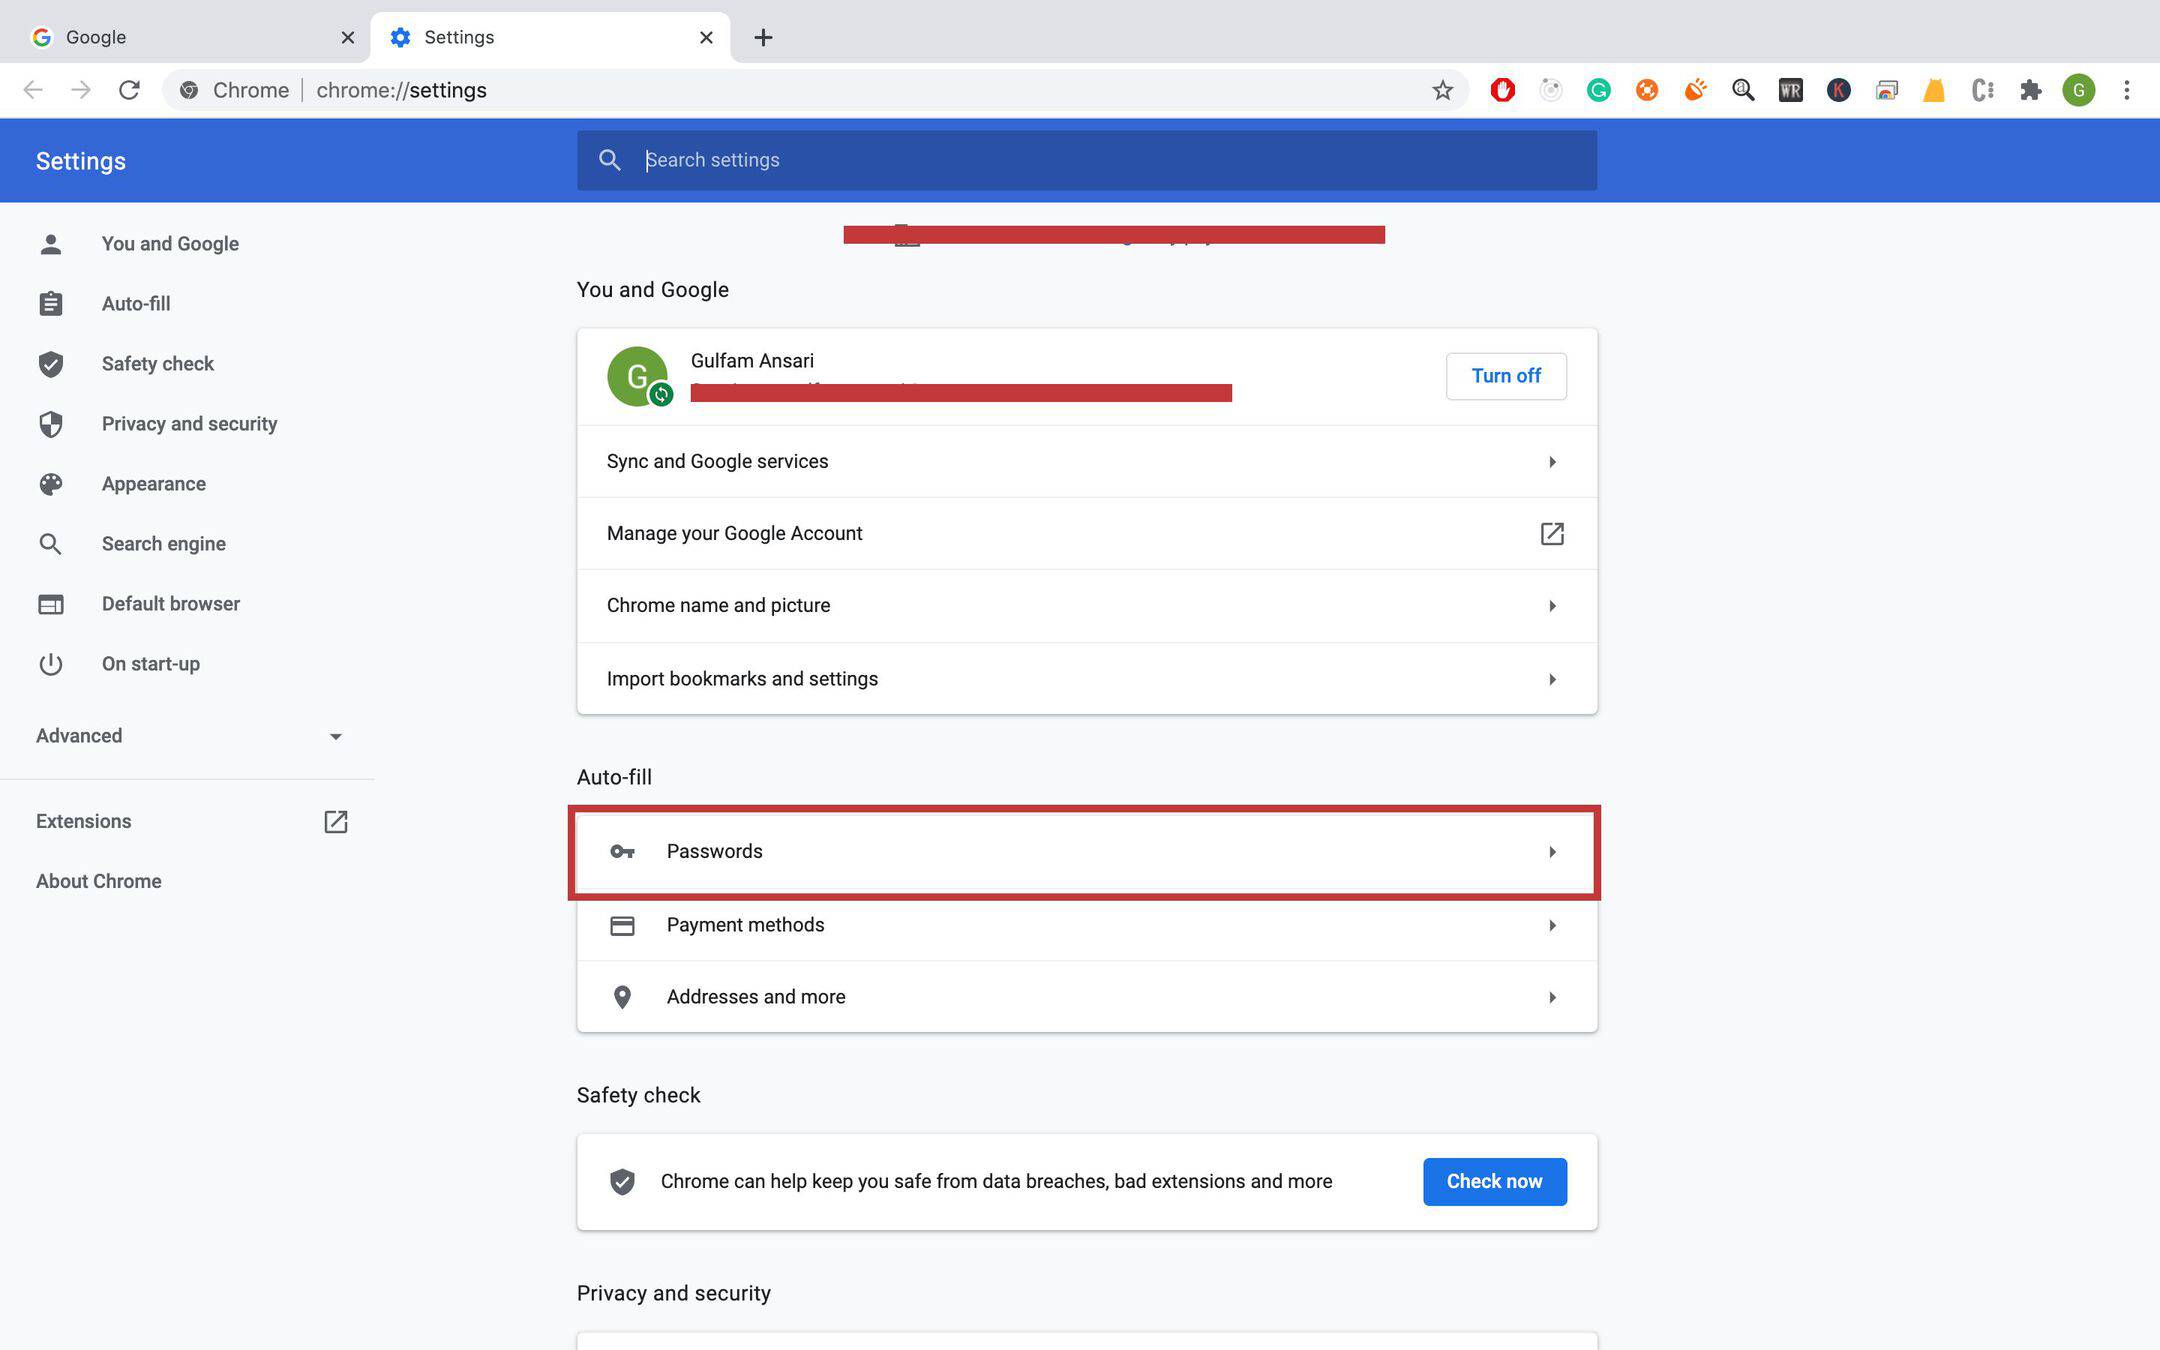 how to find saved passwords on google chrome